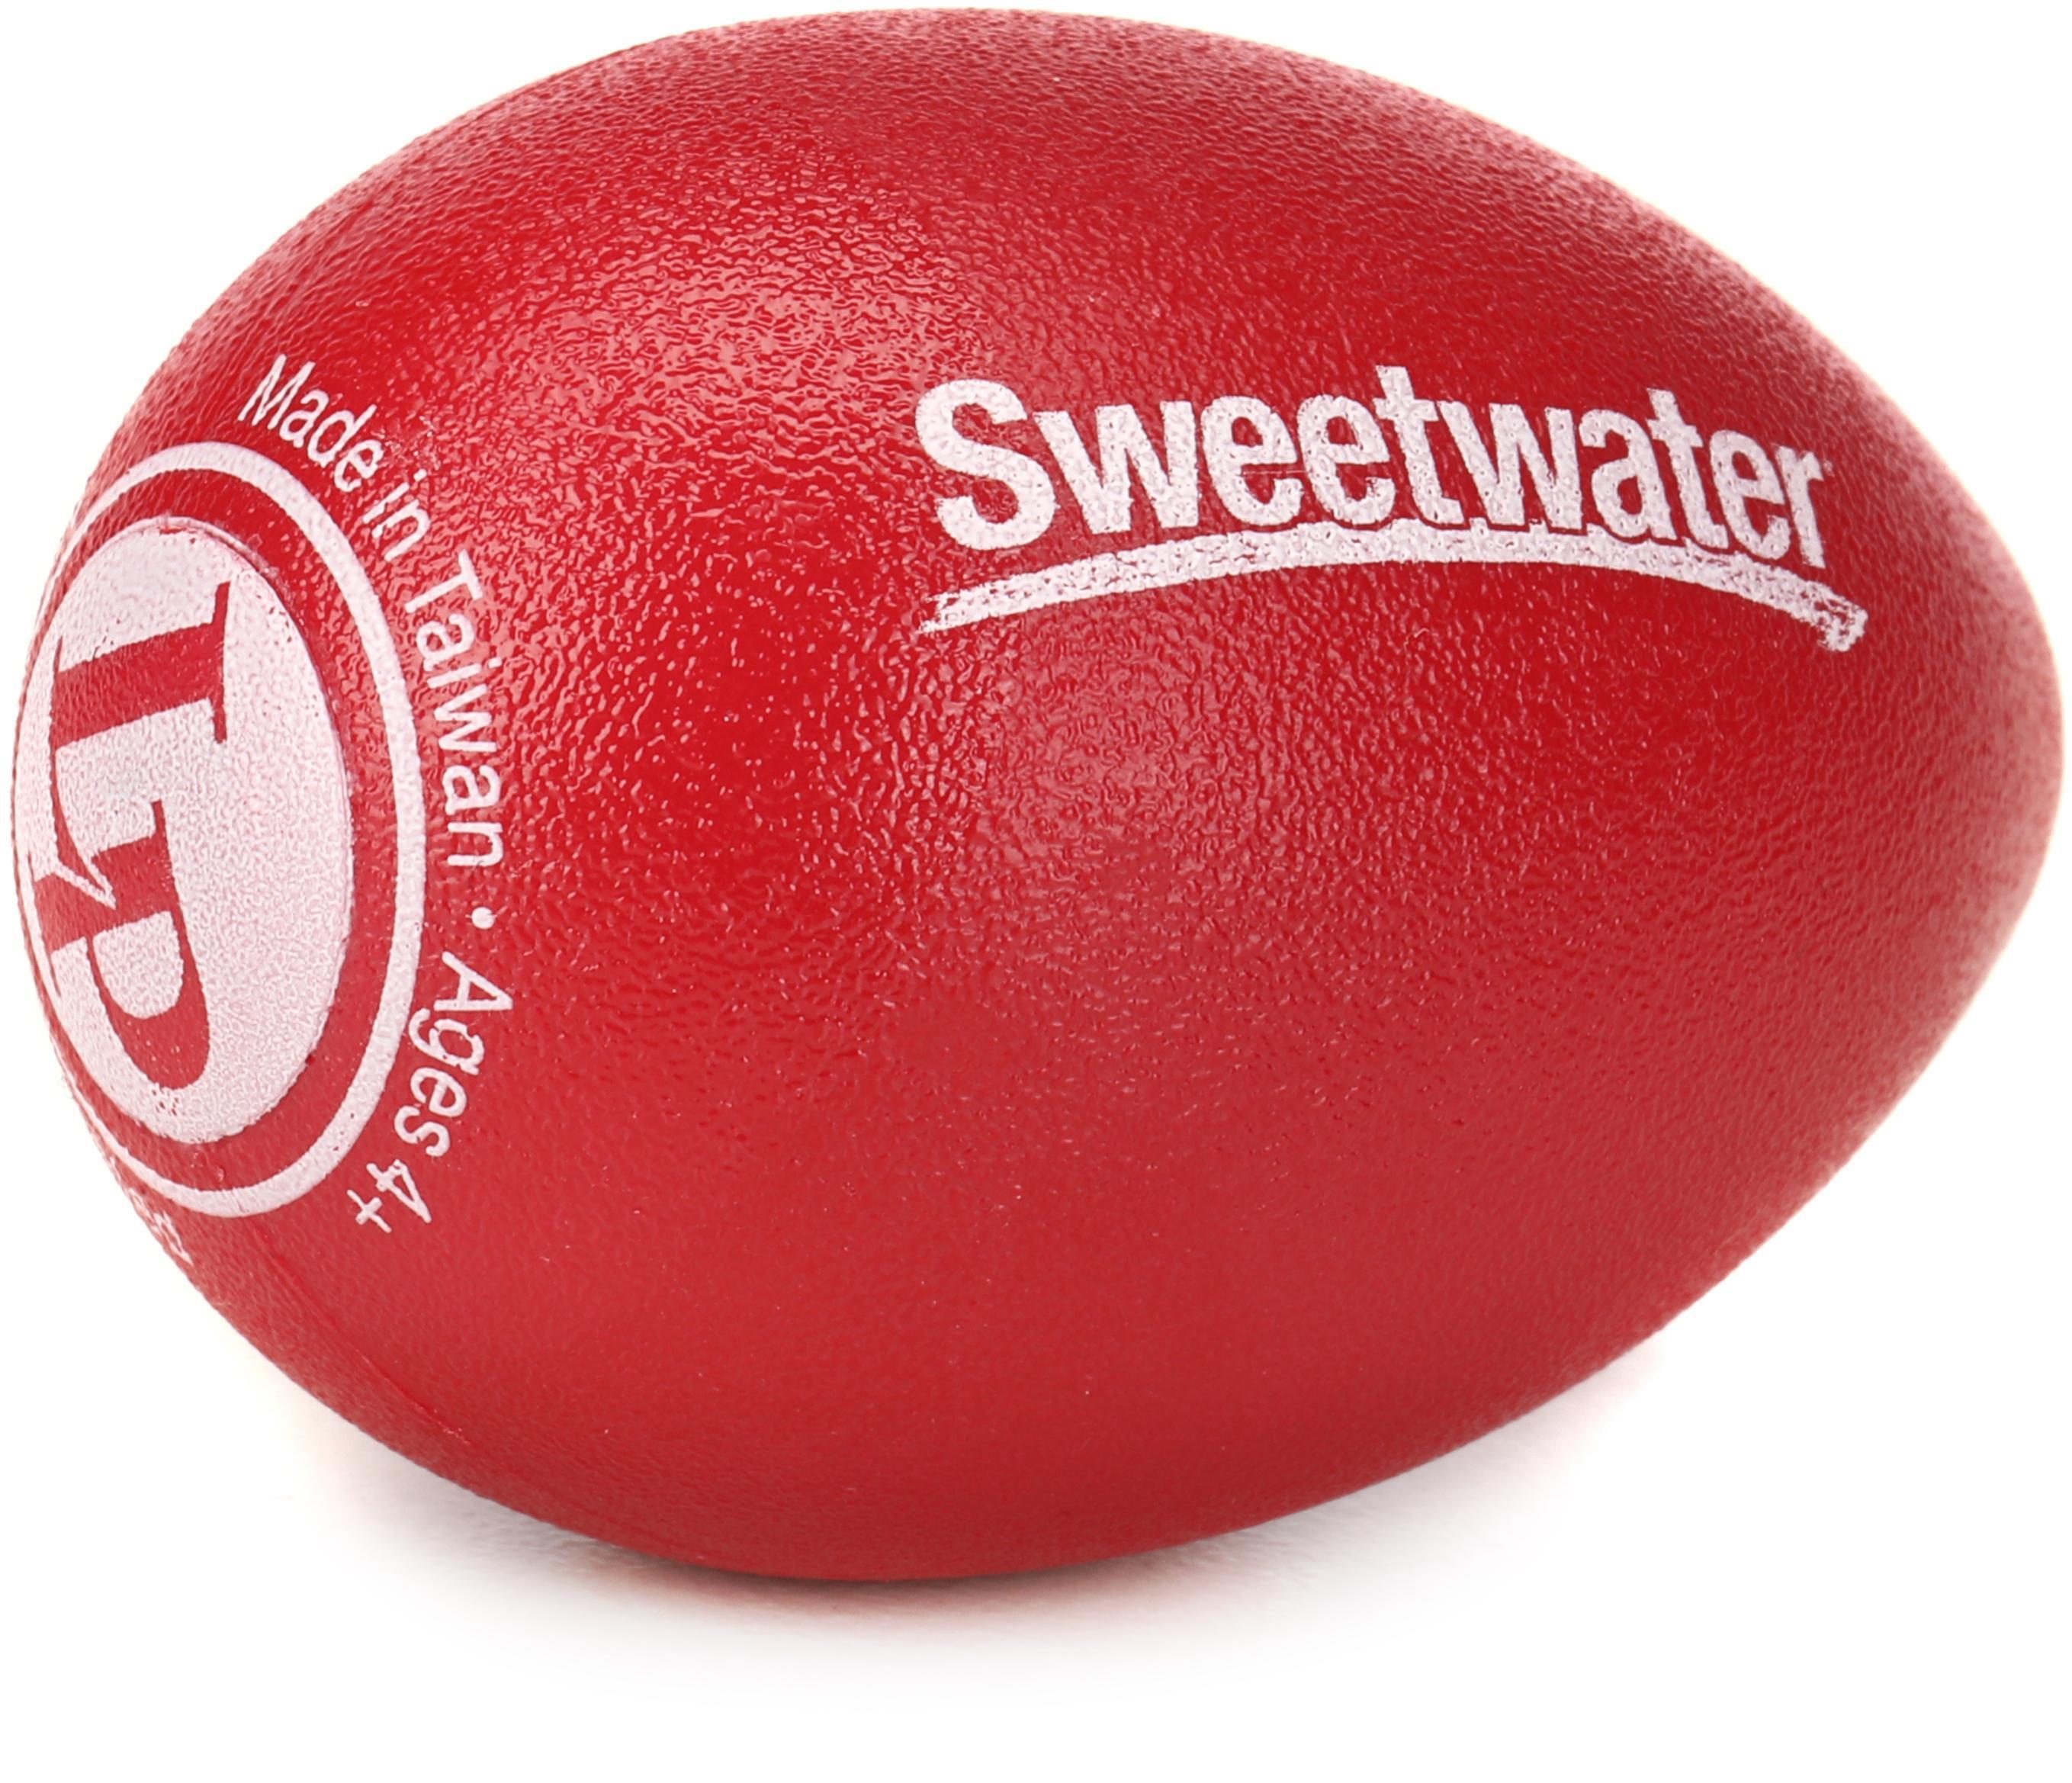 Bundled Item: Latin Percussion Sweetwater Egg Shaker - Red